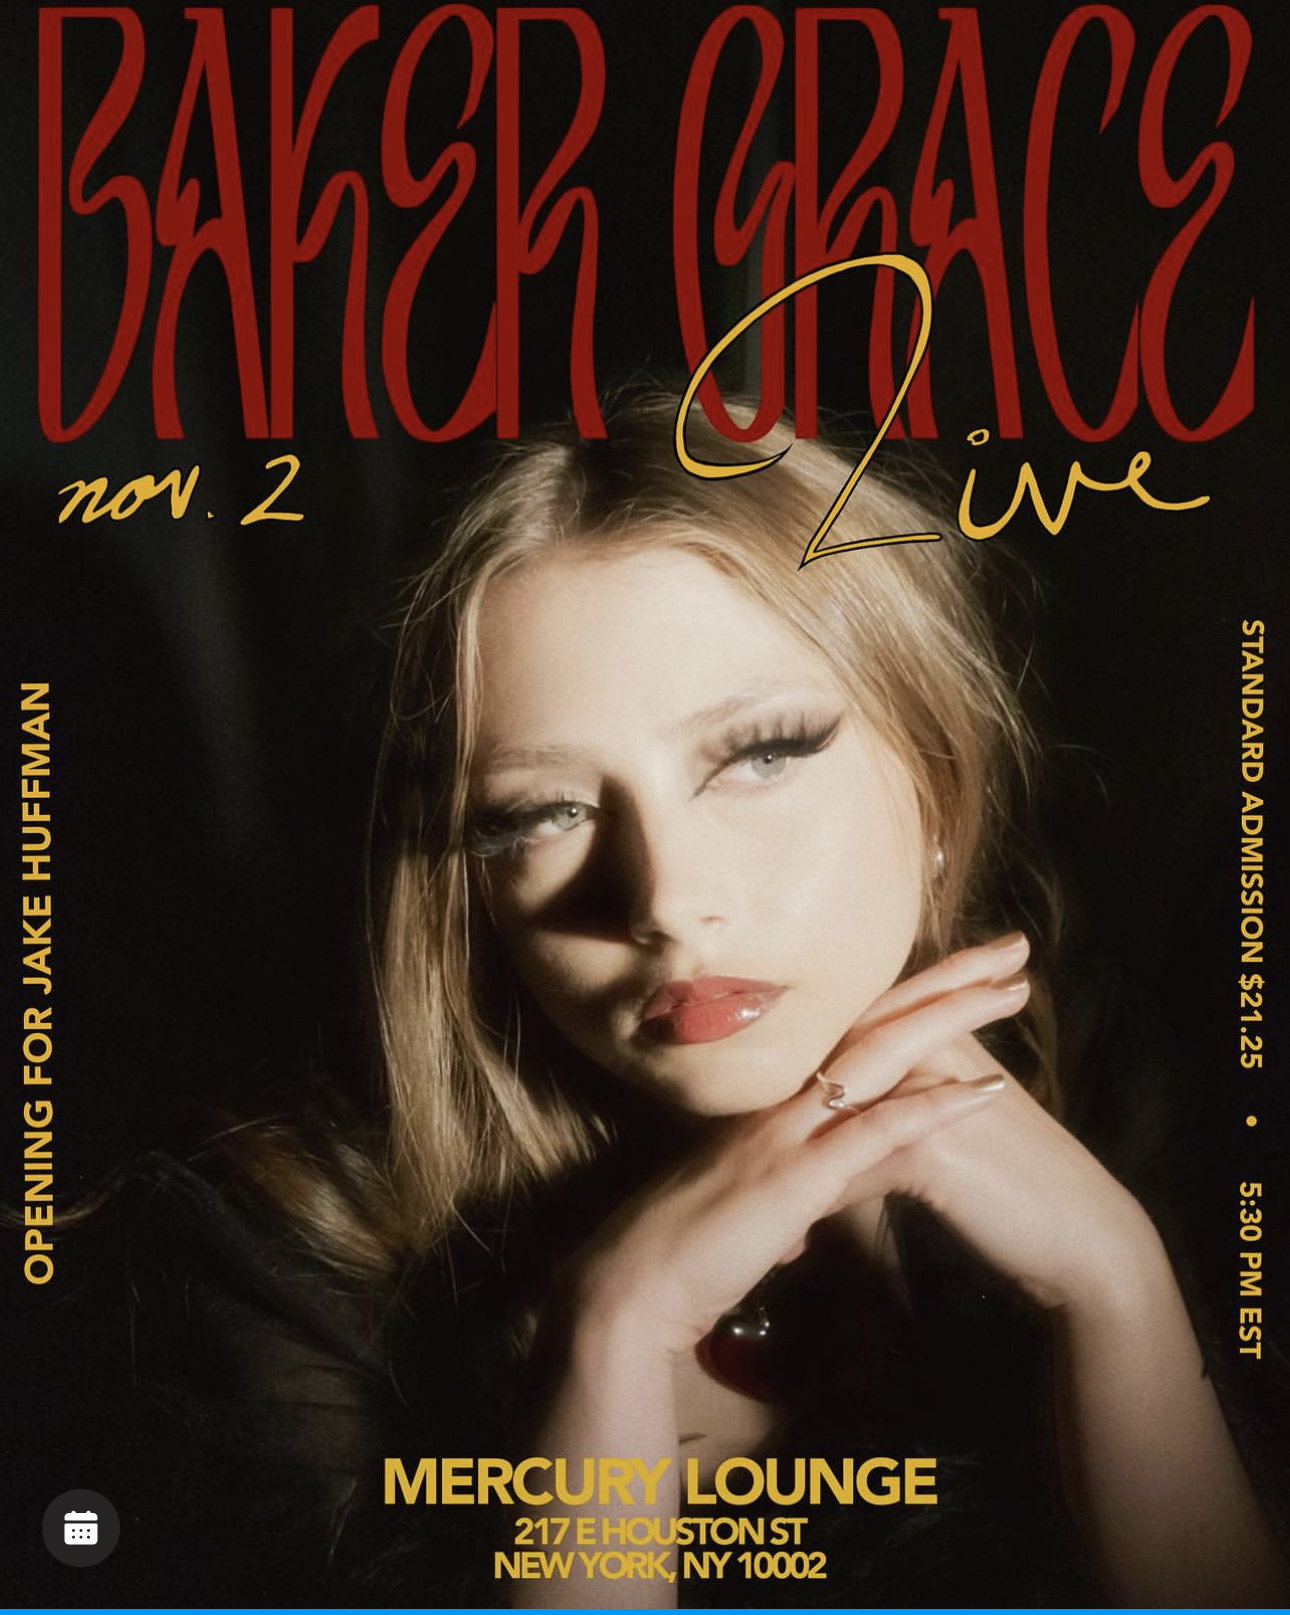 Baker Grace To Perform At Mercury Lounge on Thursday, November 2nd, 2023 In NYC